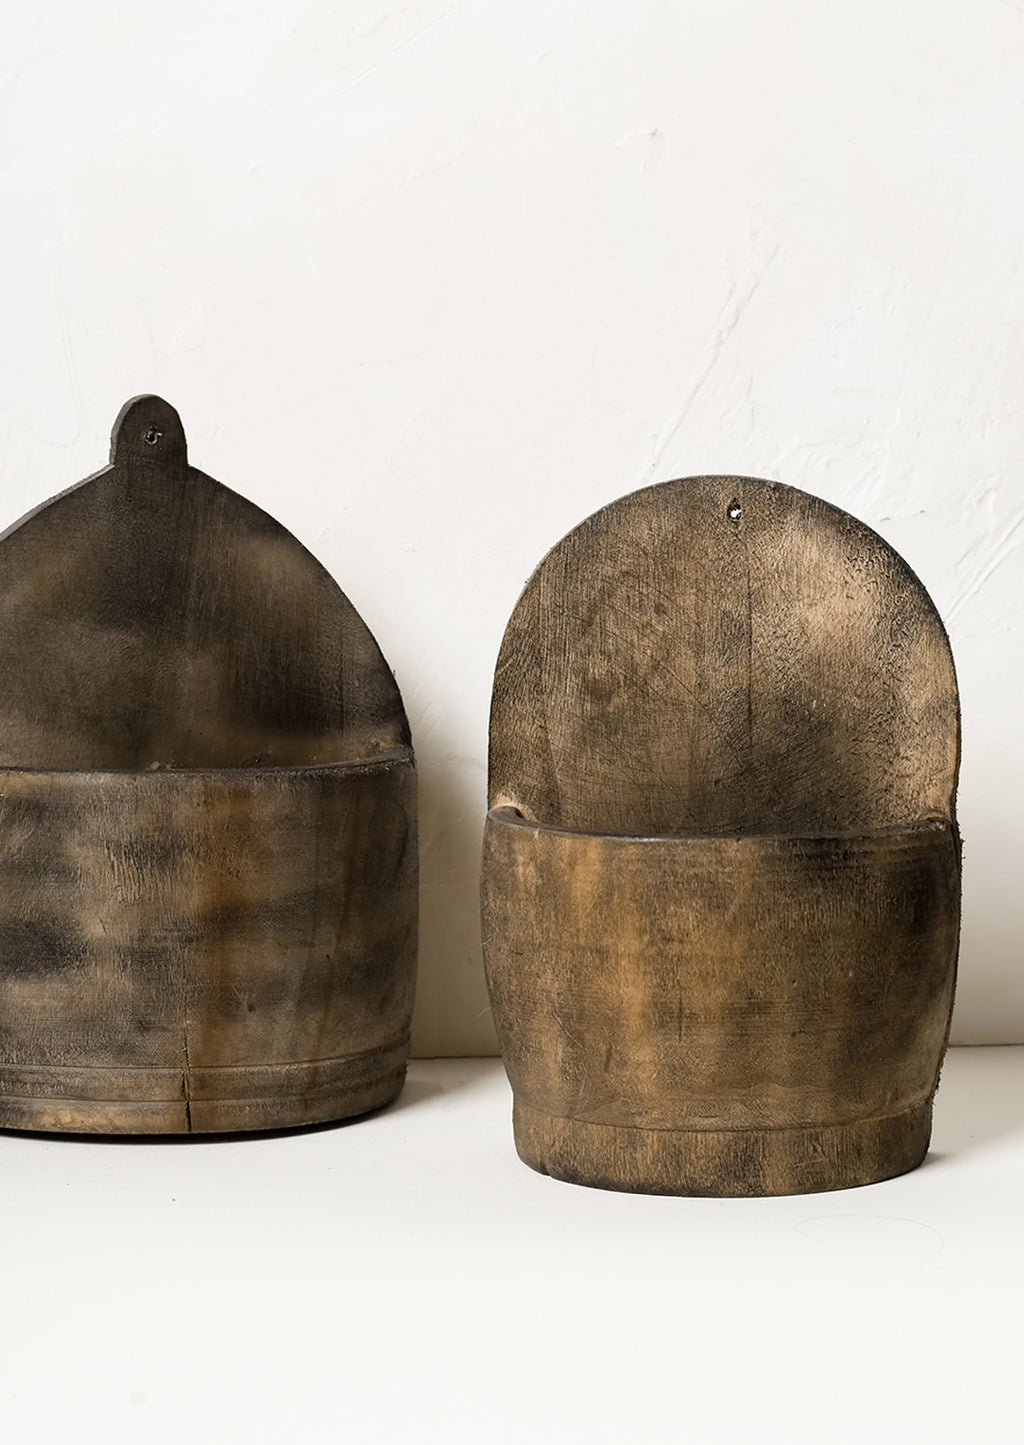 1: Two vintage looking wooden wall baskets in slightly different shapes.